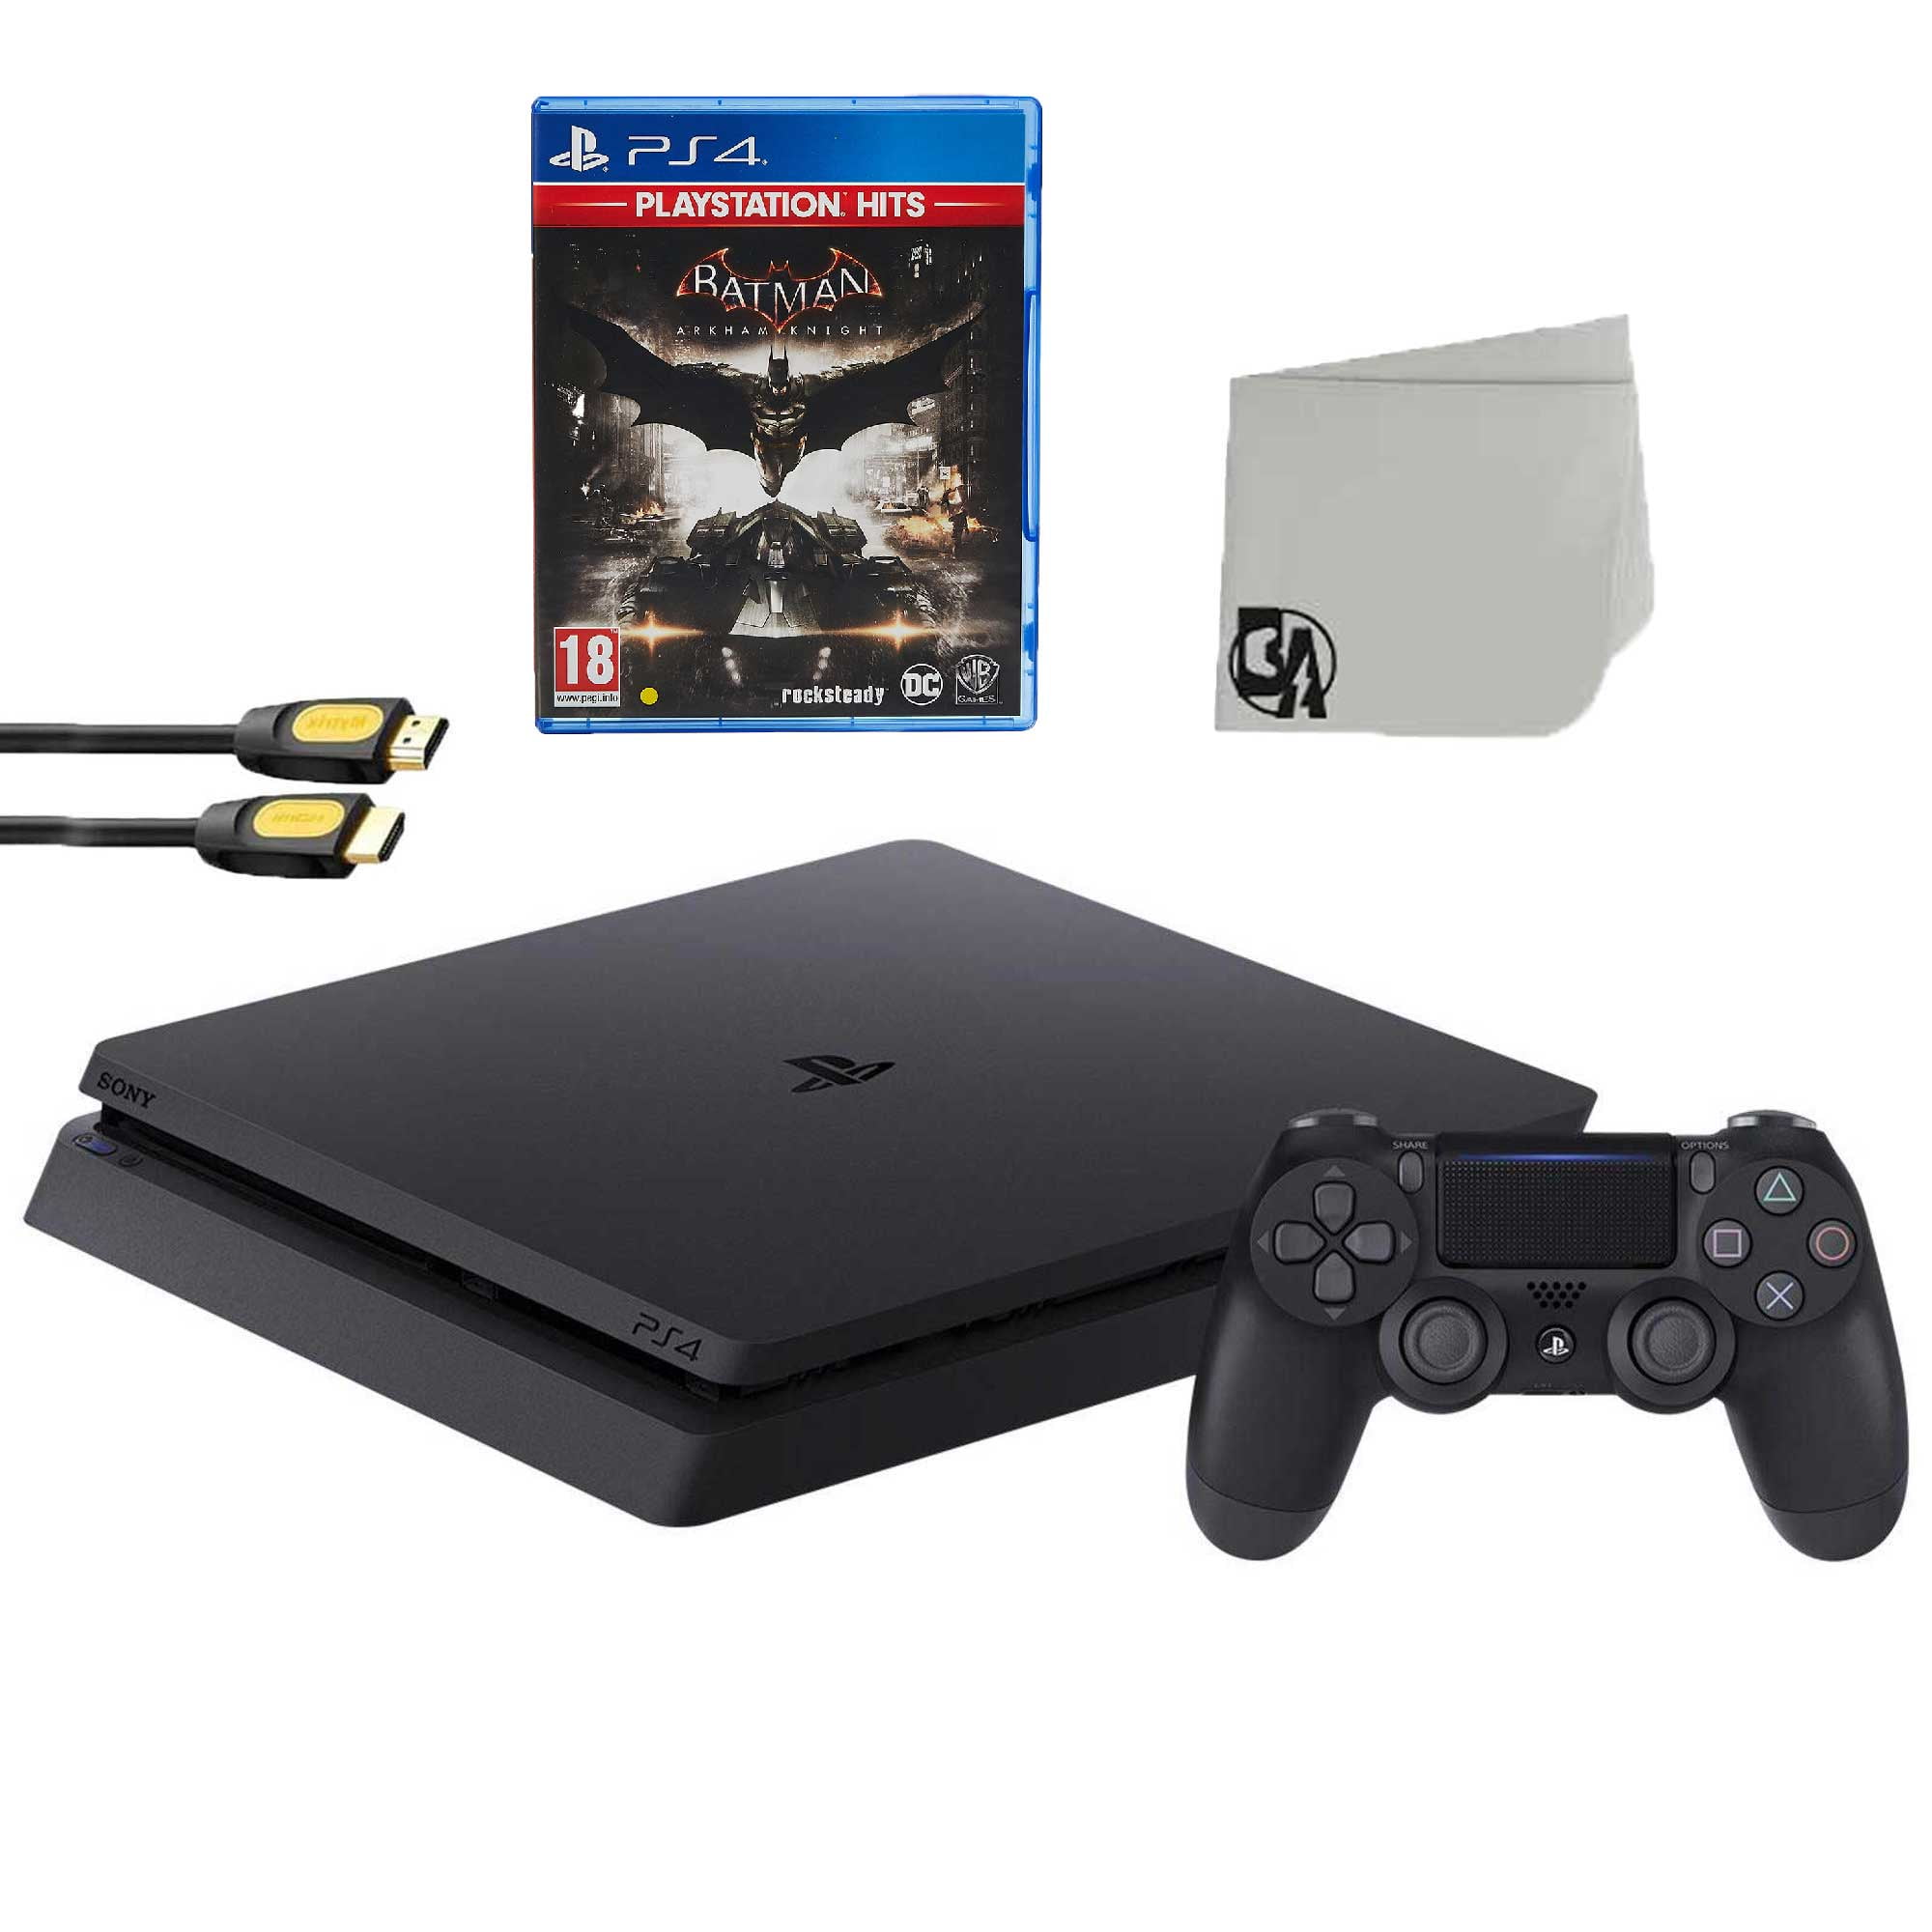 Console PlayStation 4 Slim 500GB - Consoles PS4 - Playstation 4